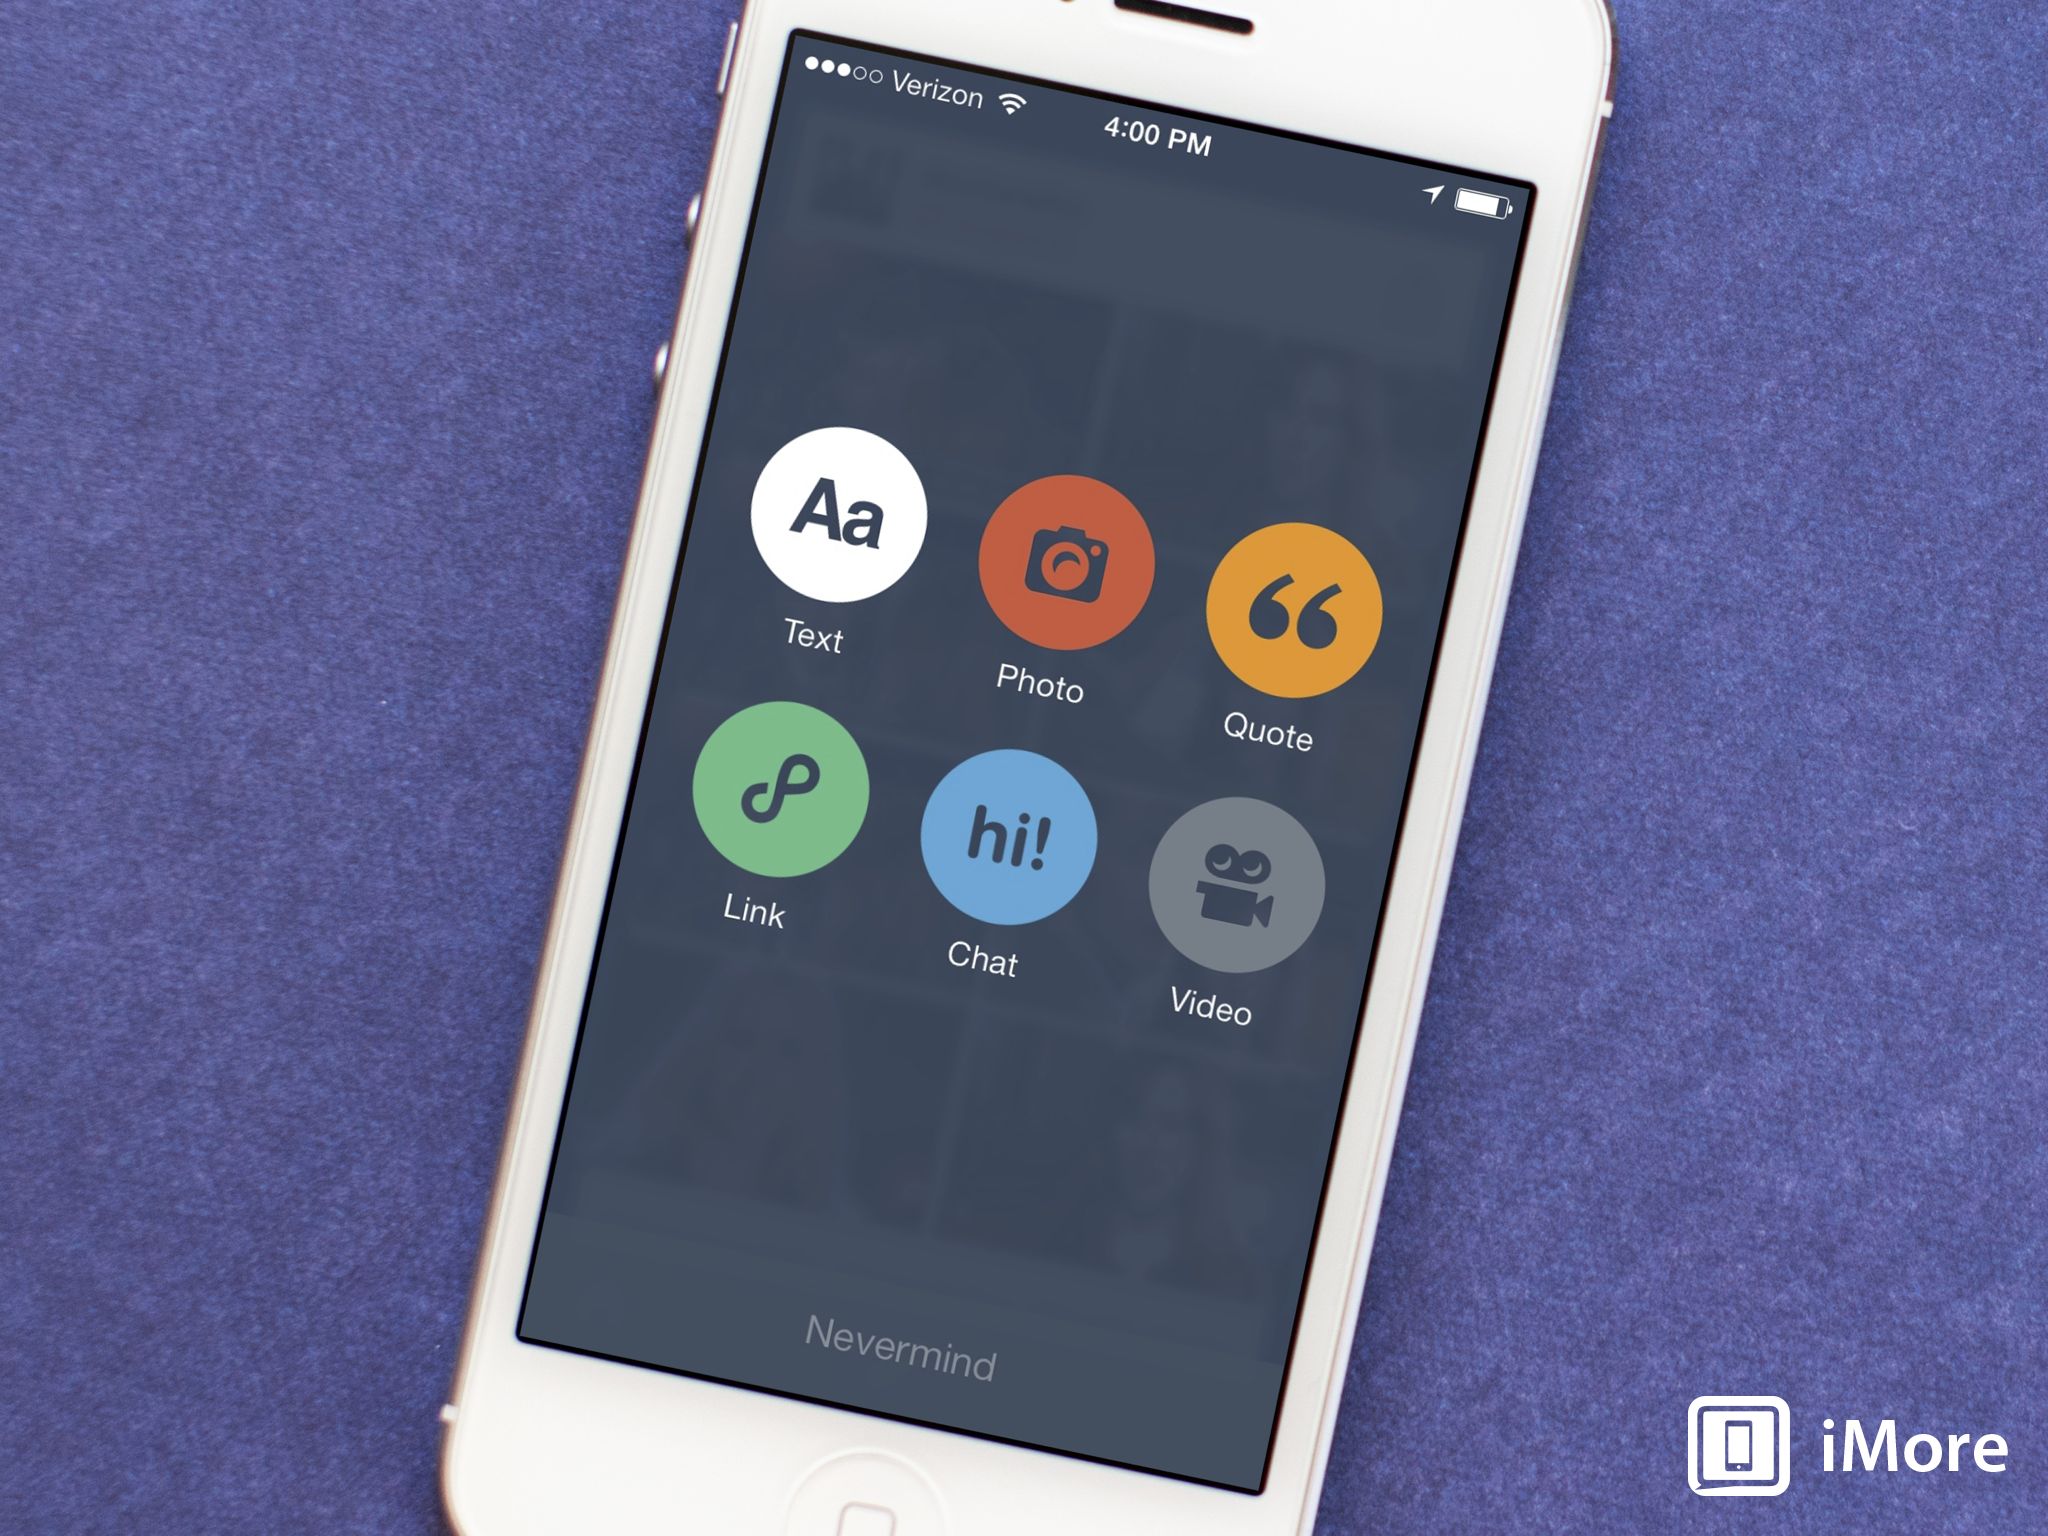 Tumblr app refreshed and reorganized for iOS 7